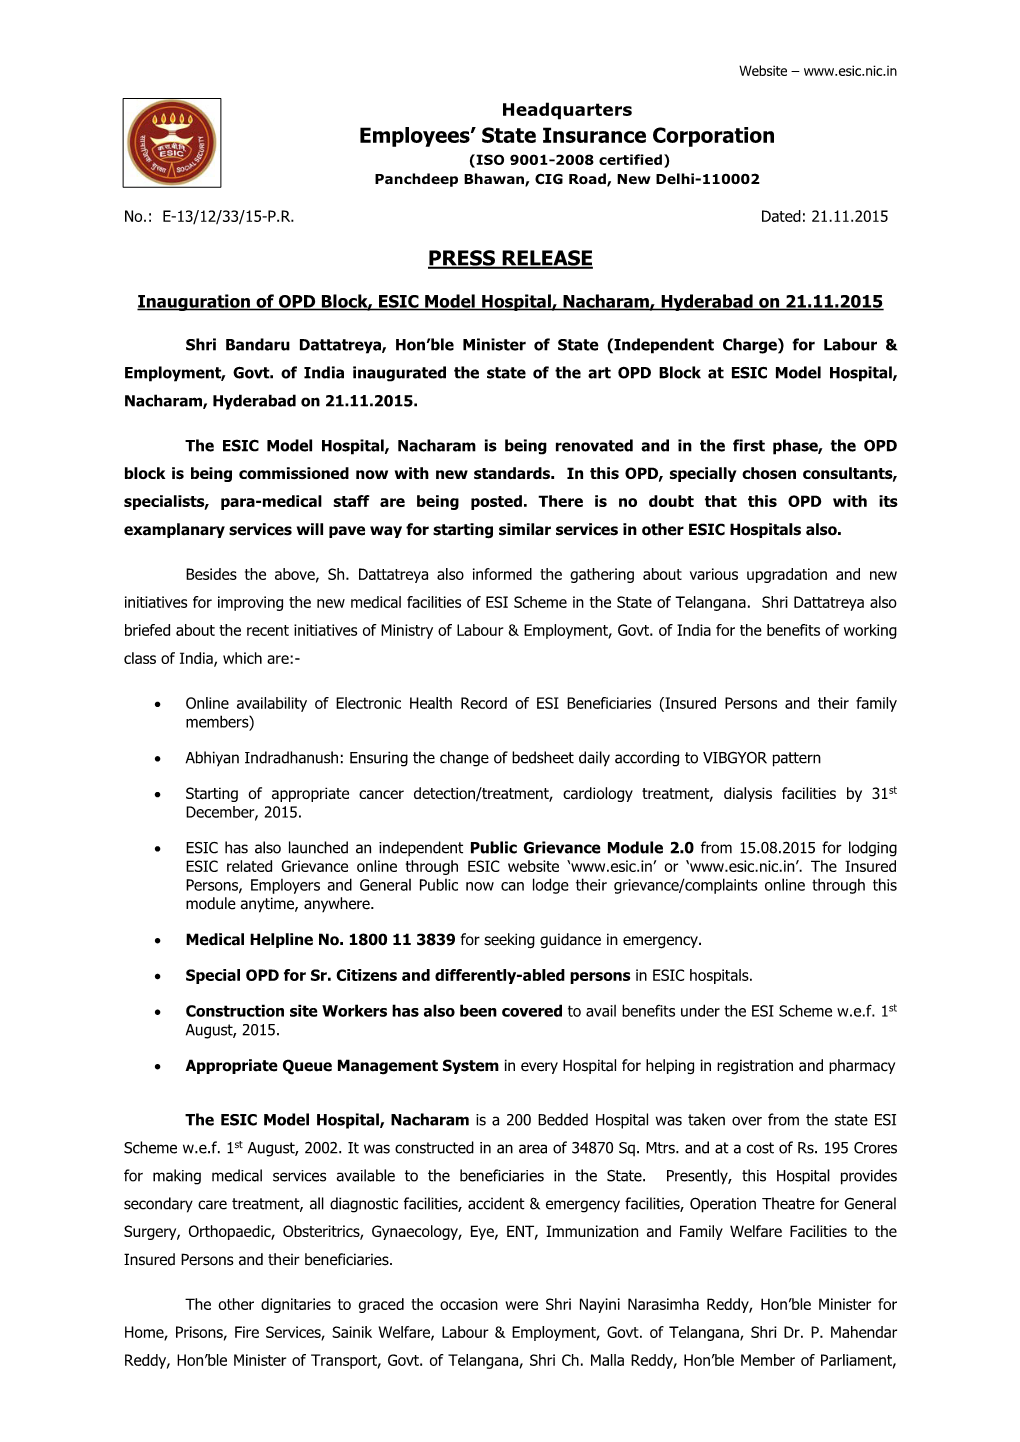 Employees' State Insurance Corporation PRESS RELEASE